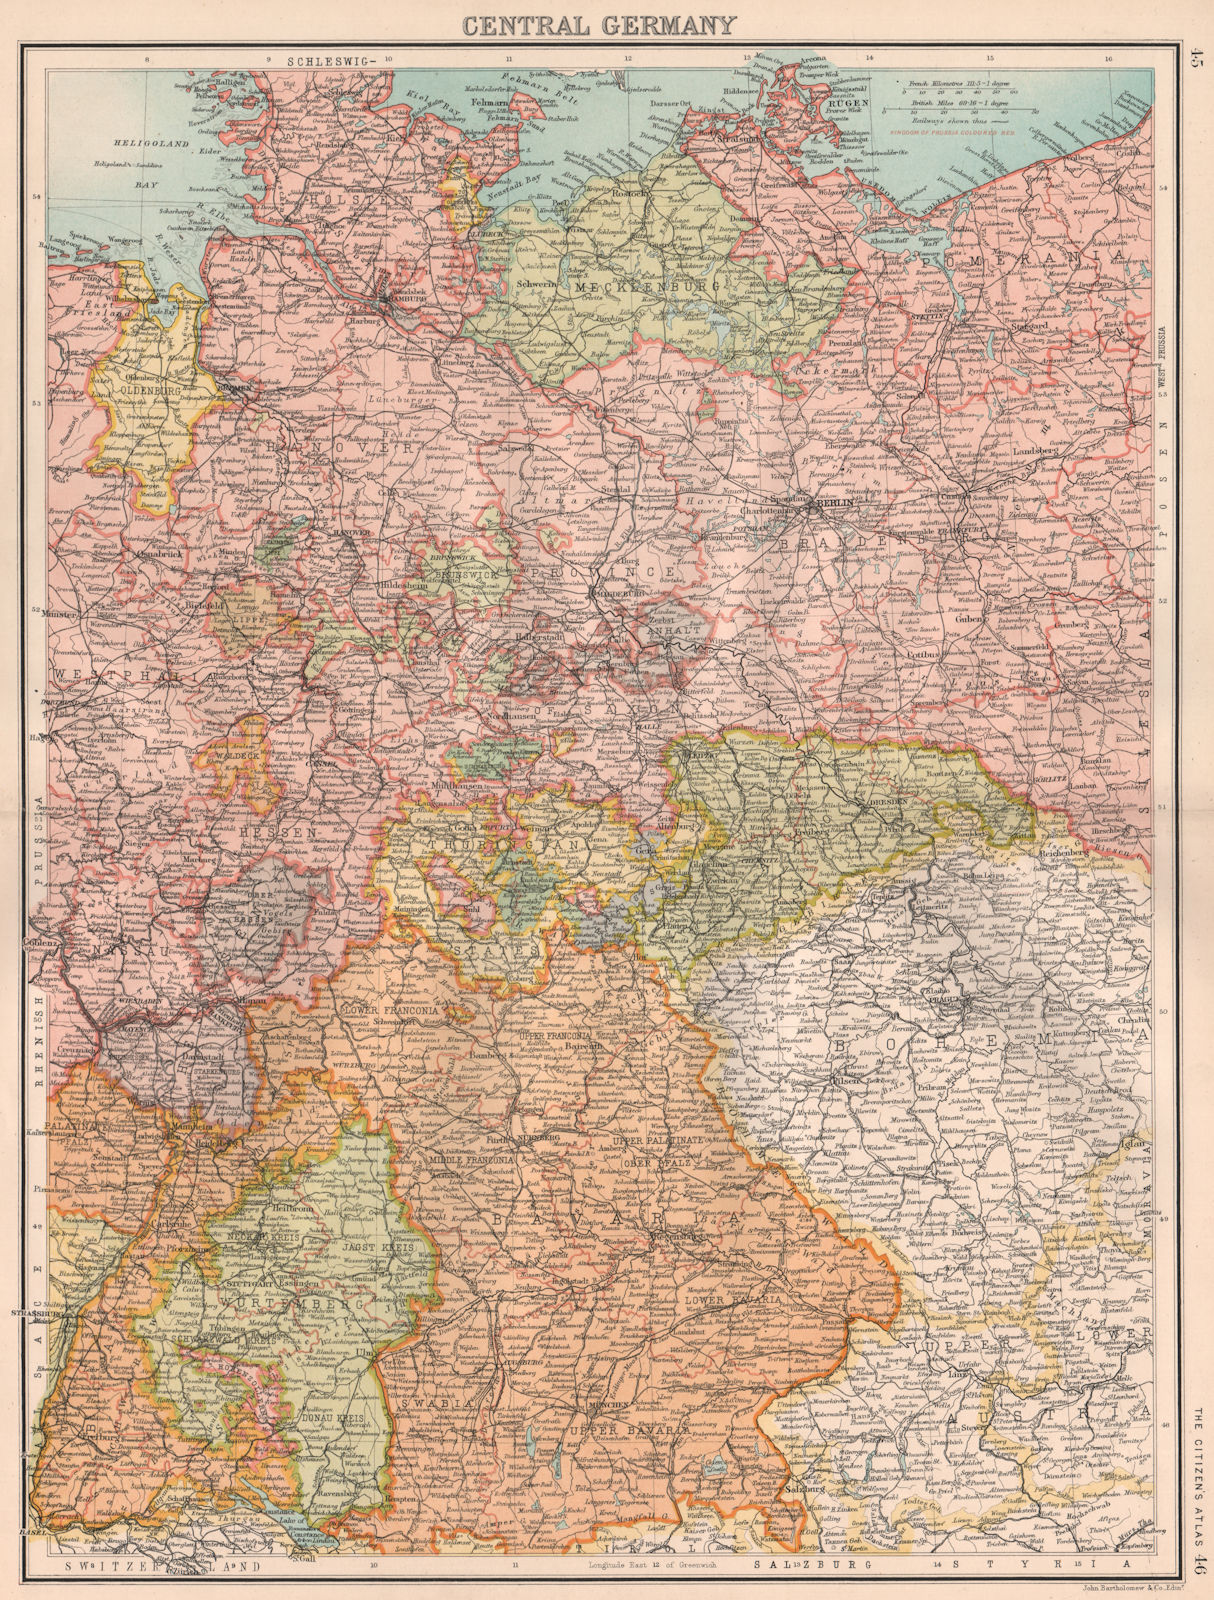 Associate Product GERMANY. Central Germany showing states. BARTHOLOMEW 1898 old antique map